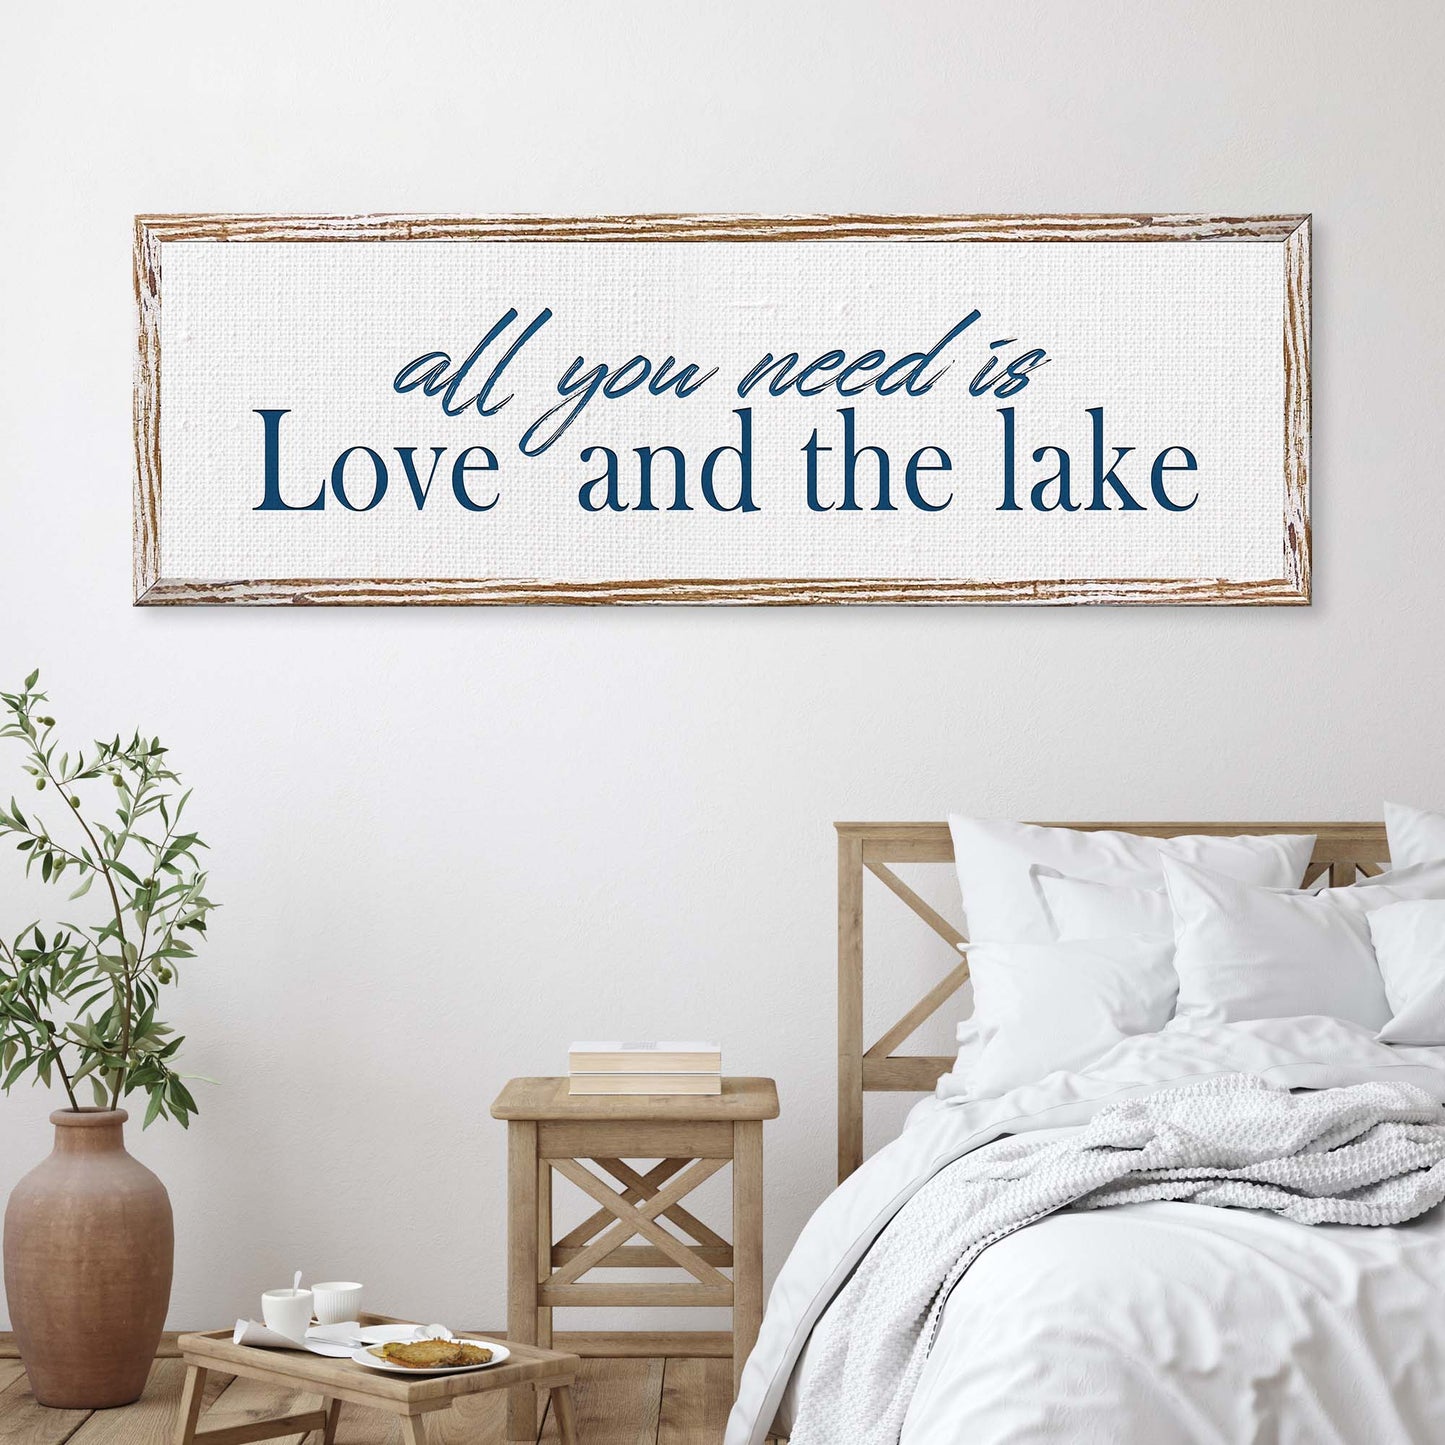 Love And The Lake Sign - Image by Tailored Canvases